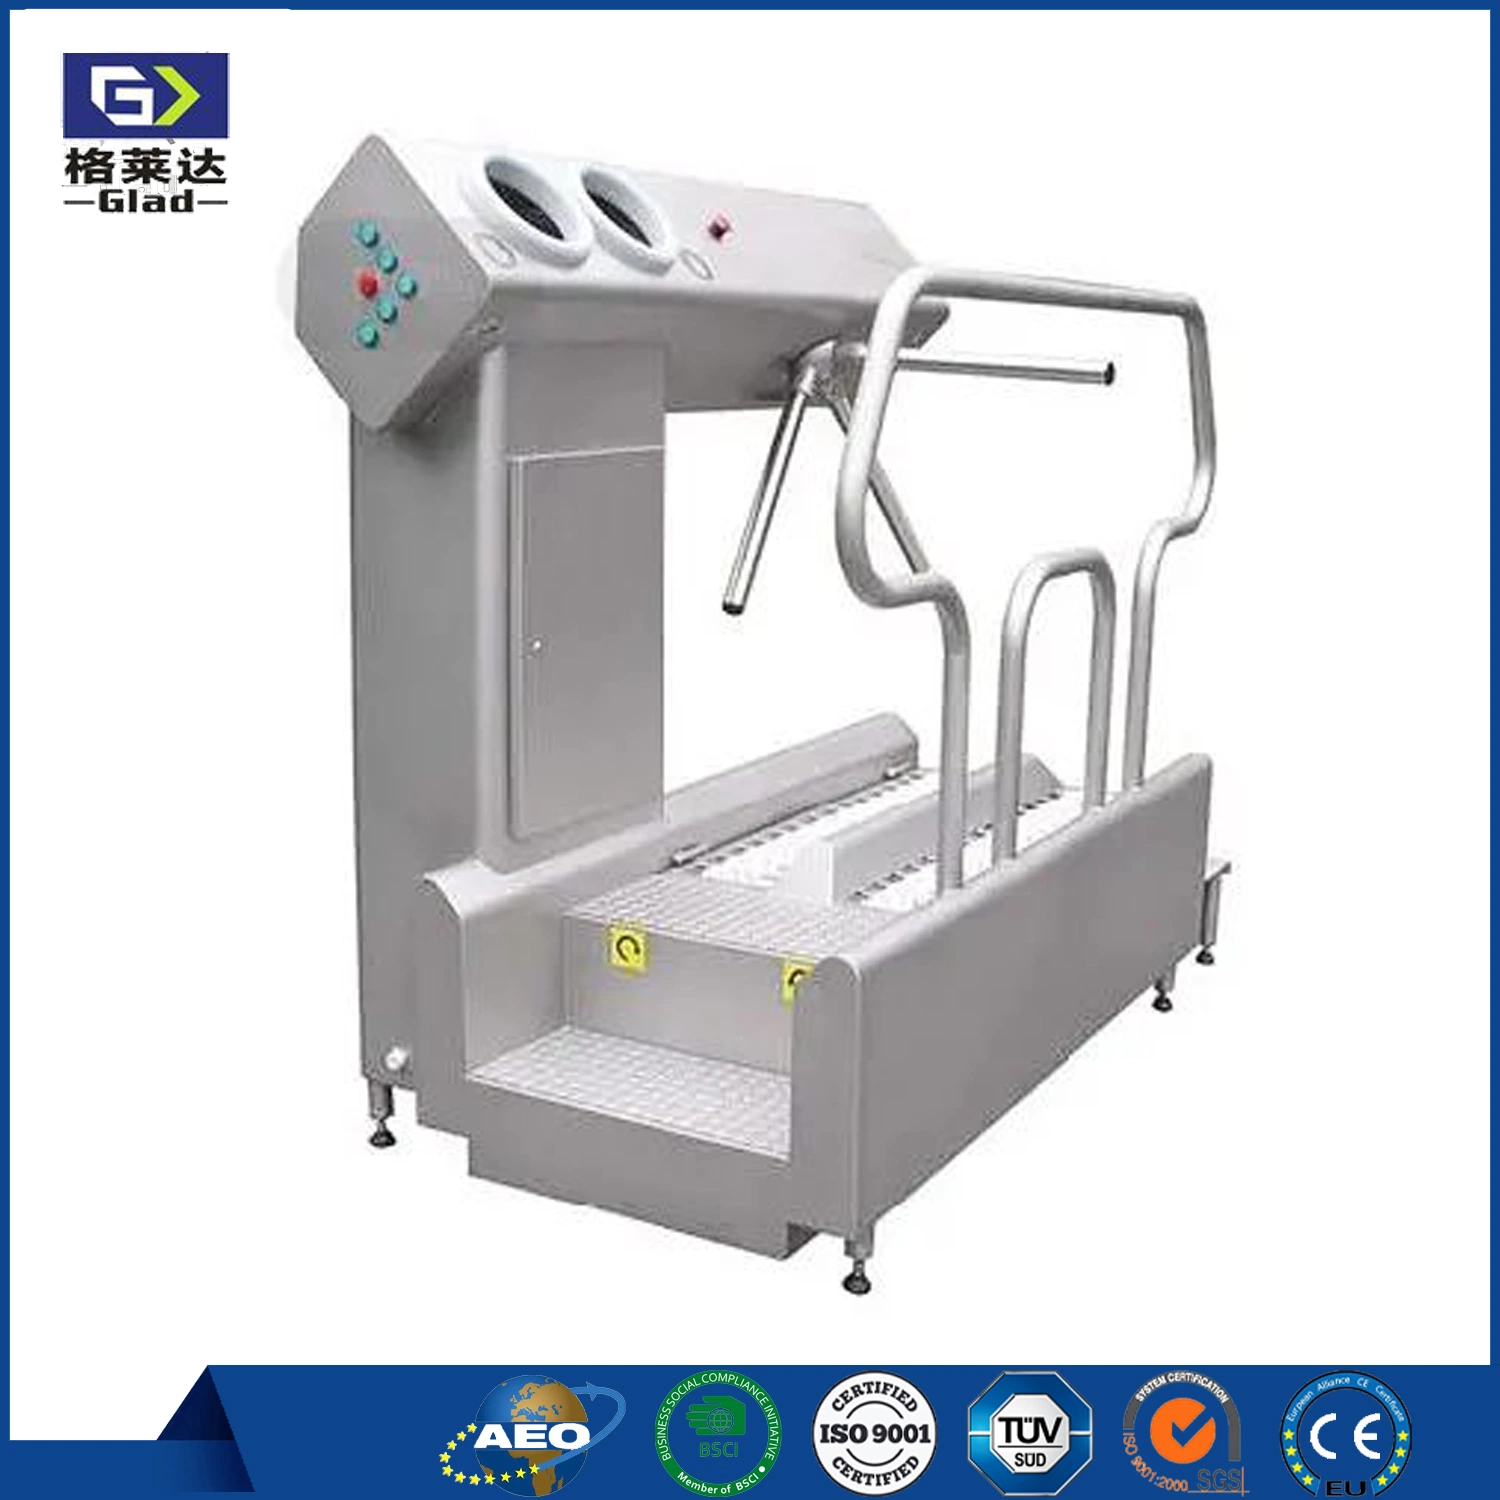 Water Boots Washer Machine Personal Hygiene Stationand Entry Control Devices Automatic Shoe Washing & Disinfection / Hand Washing Good Sold